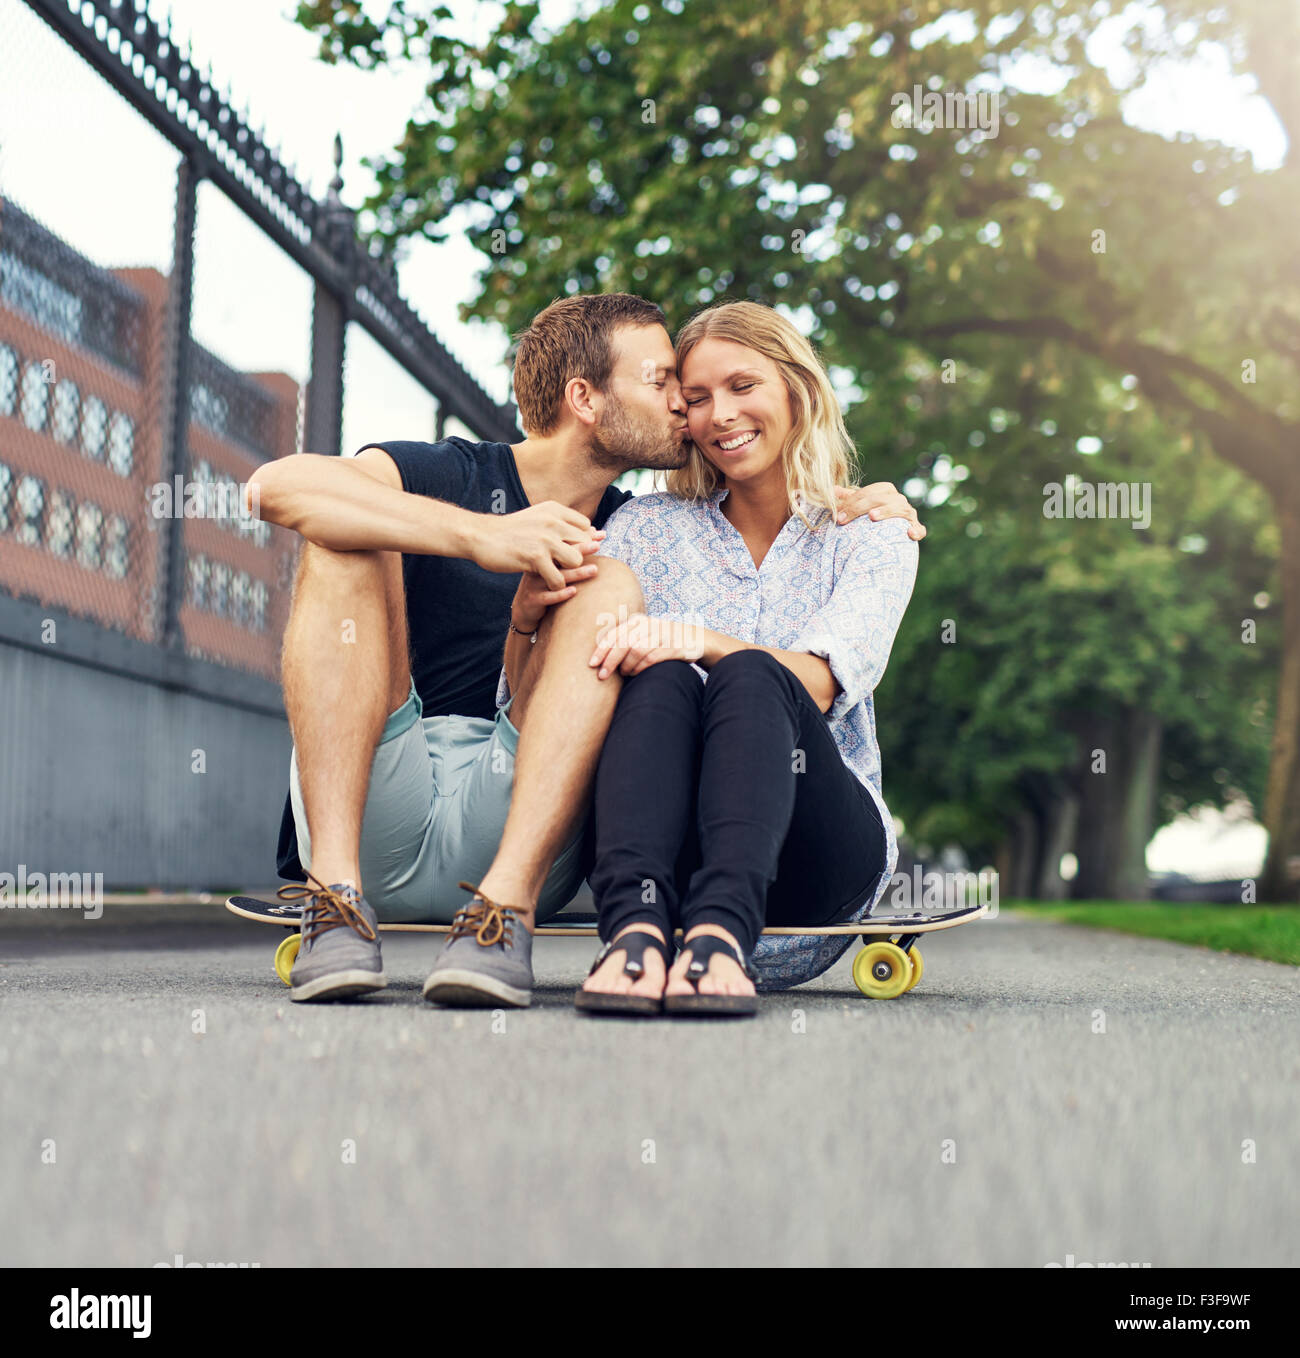 Man kissing woman on her cheek while sitting in a park Stock Photo